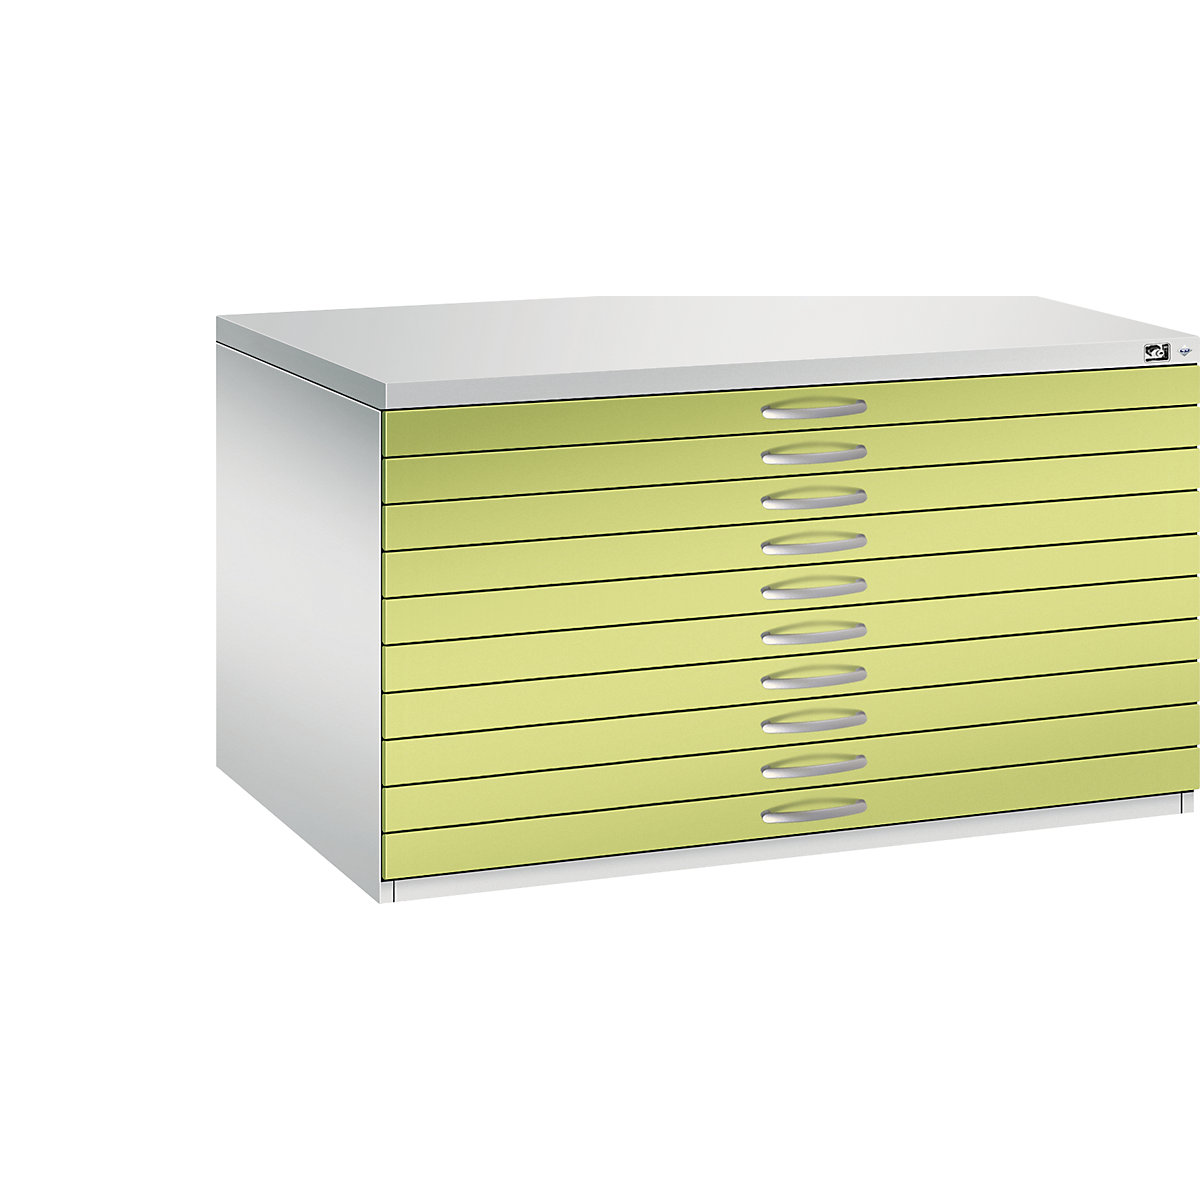 Drawing cabinet – C+P, A0, 10 drawers, height 760 mm, light grey / viridian green-18